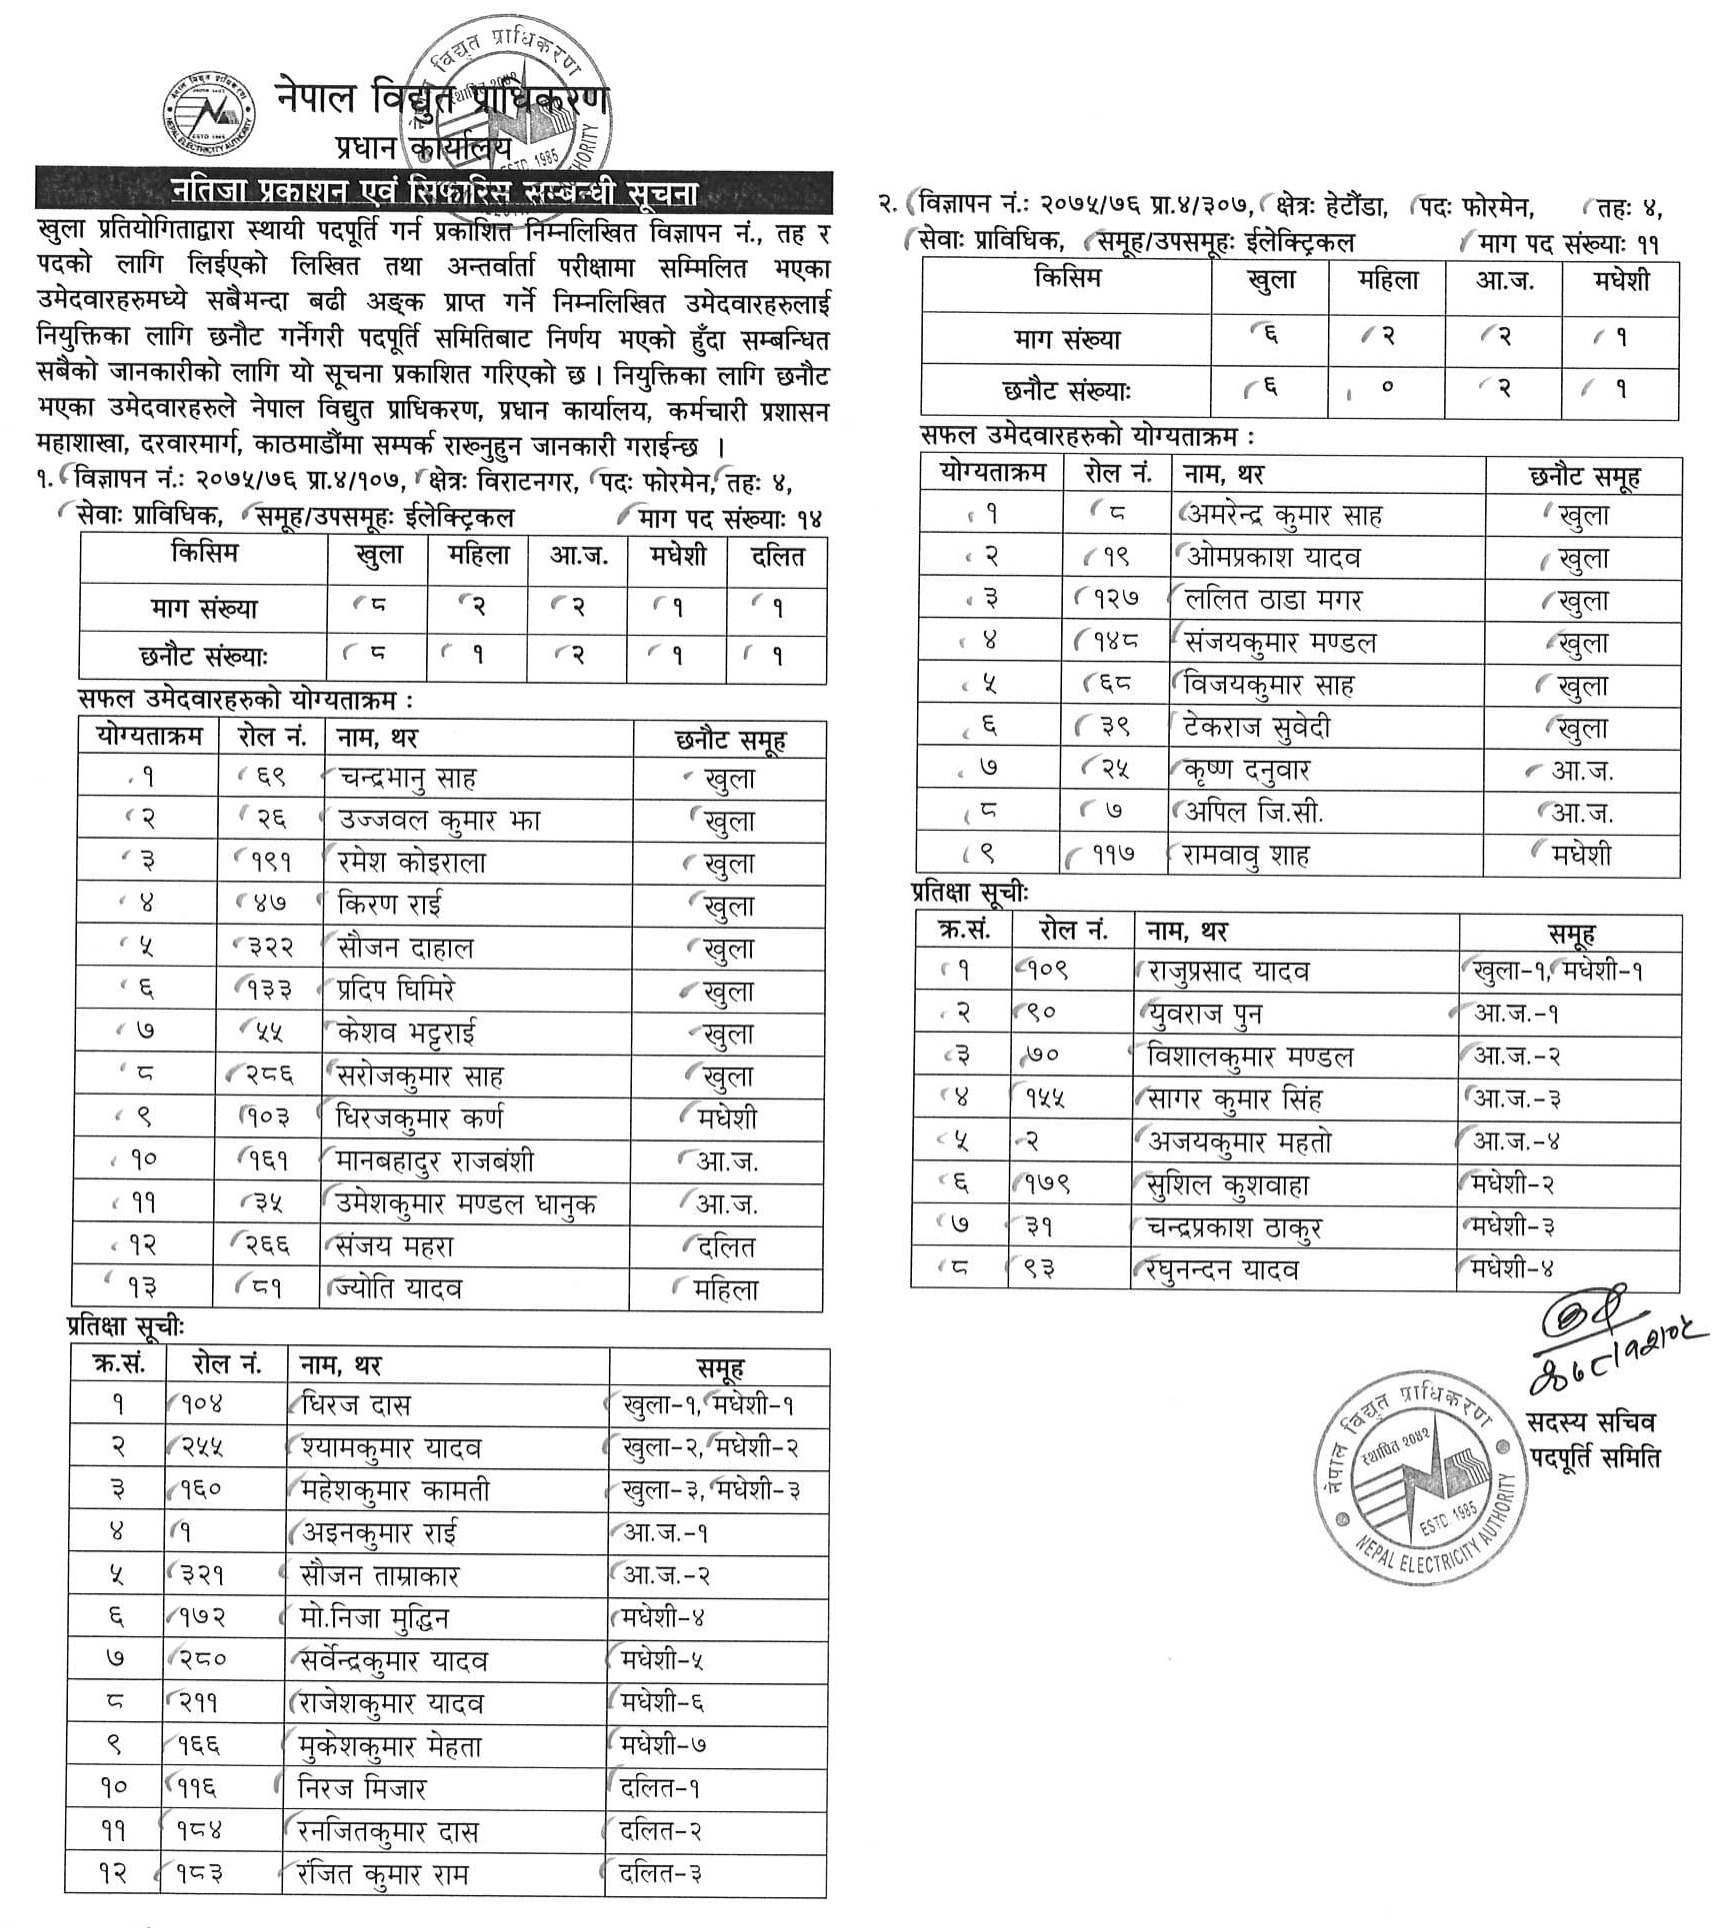 Nepal Electricity Authority Final Result of Various Post